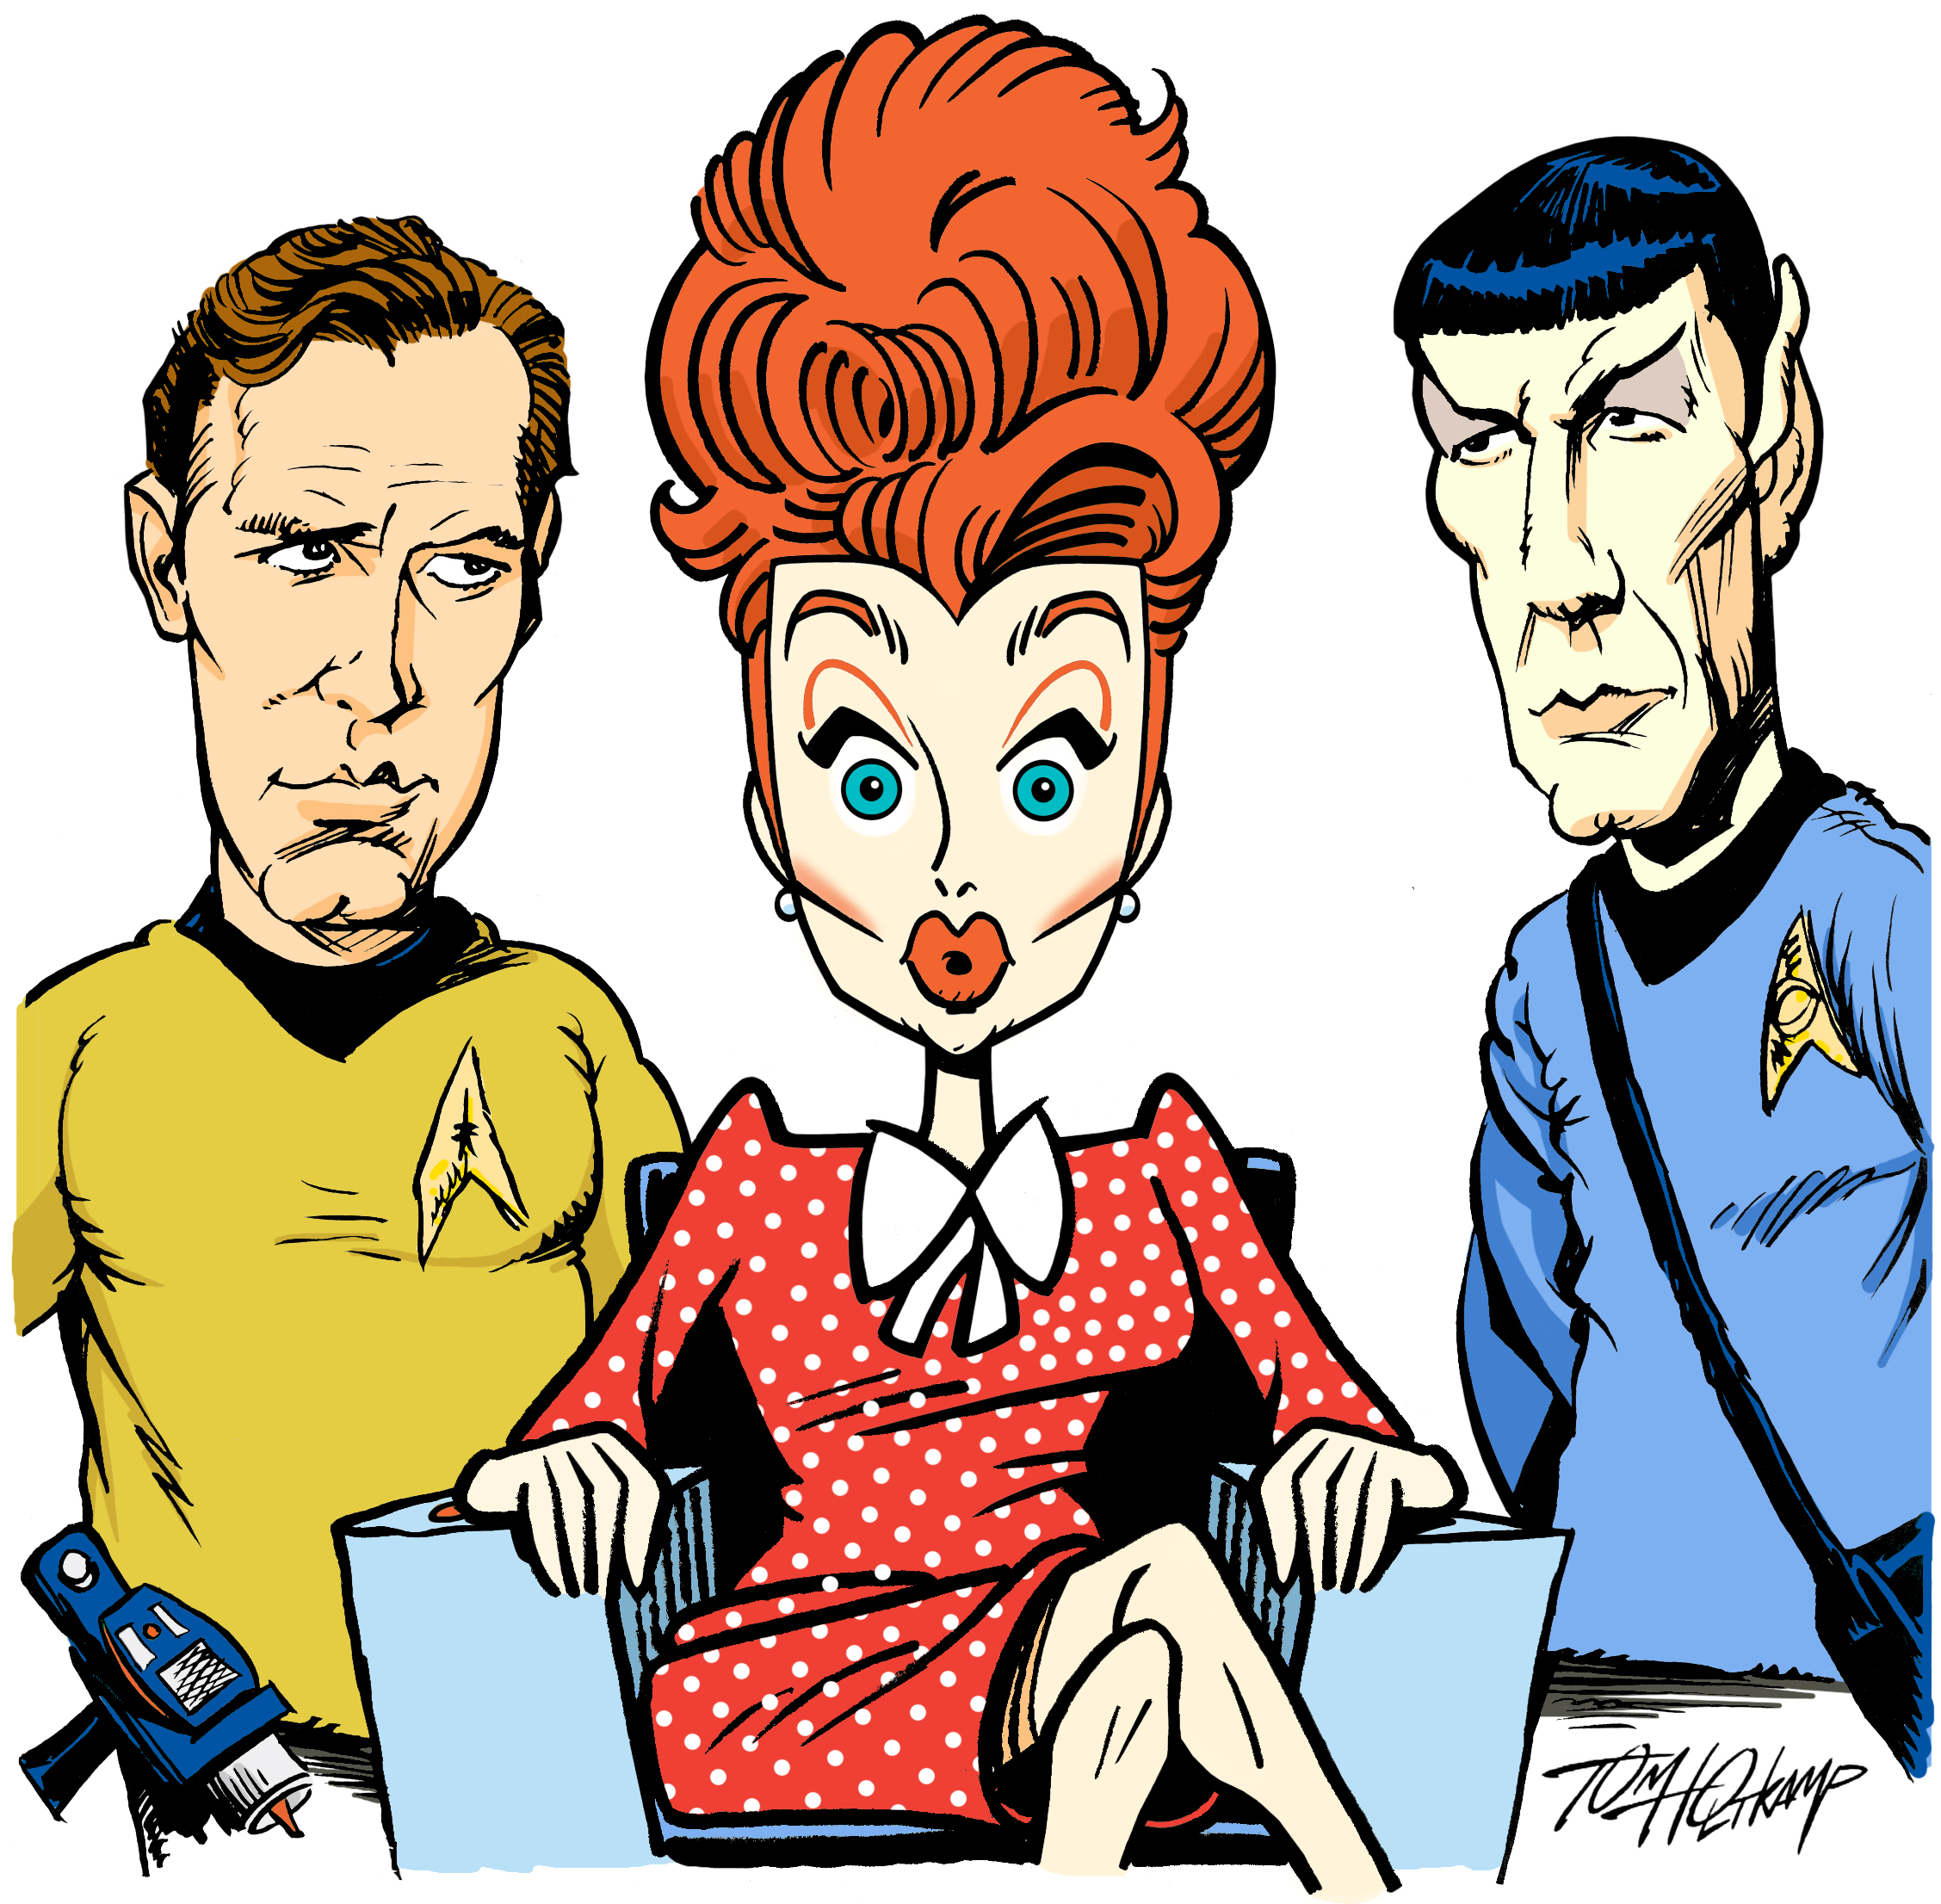 lucy - star trek: lucy color